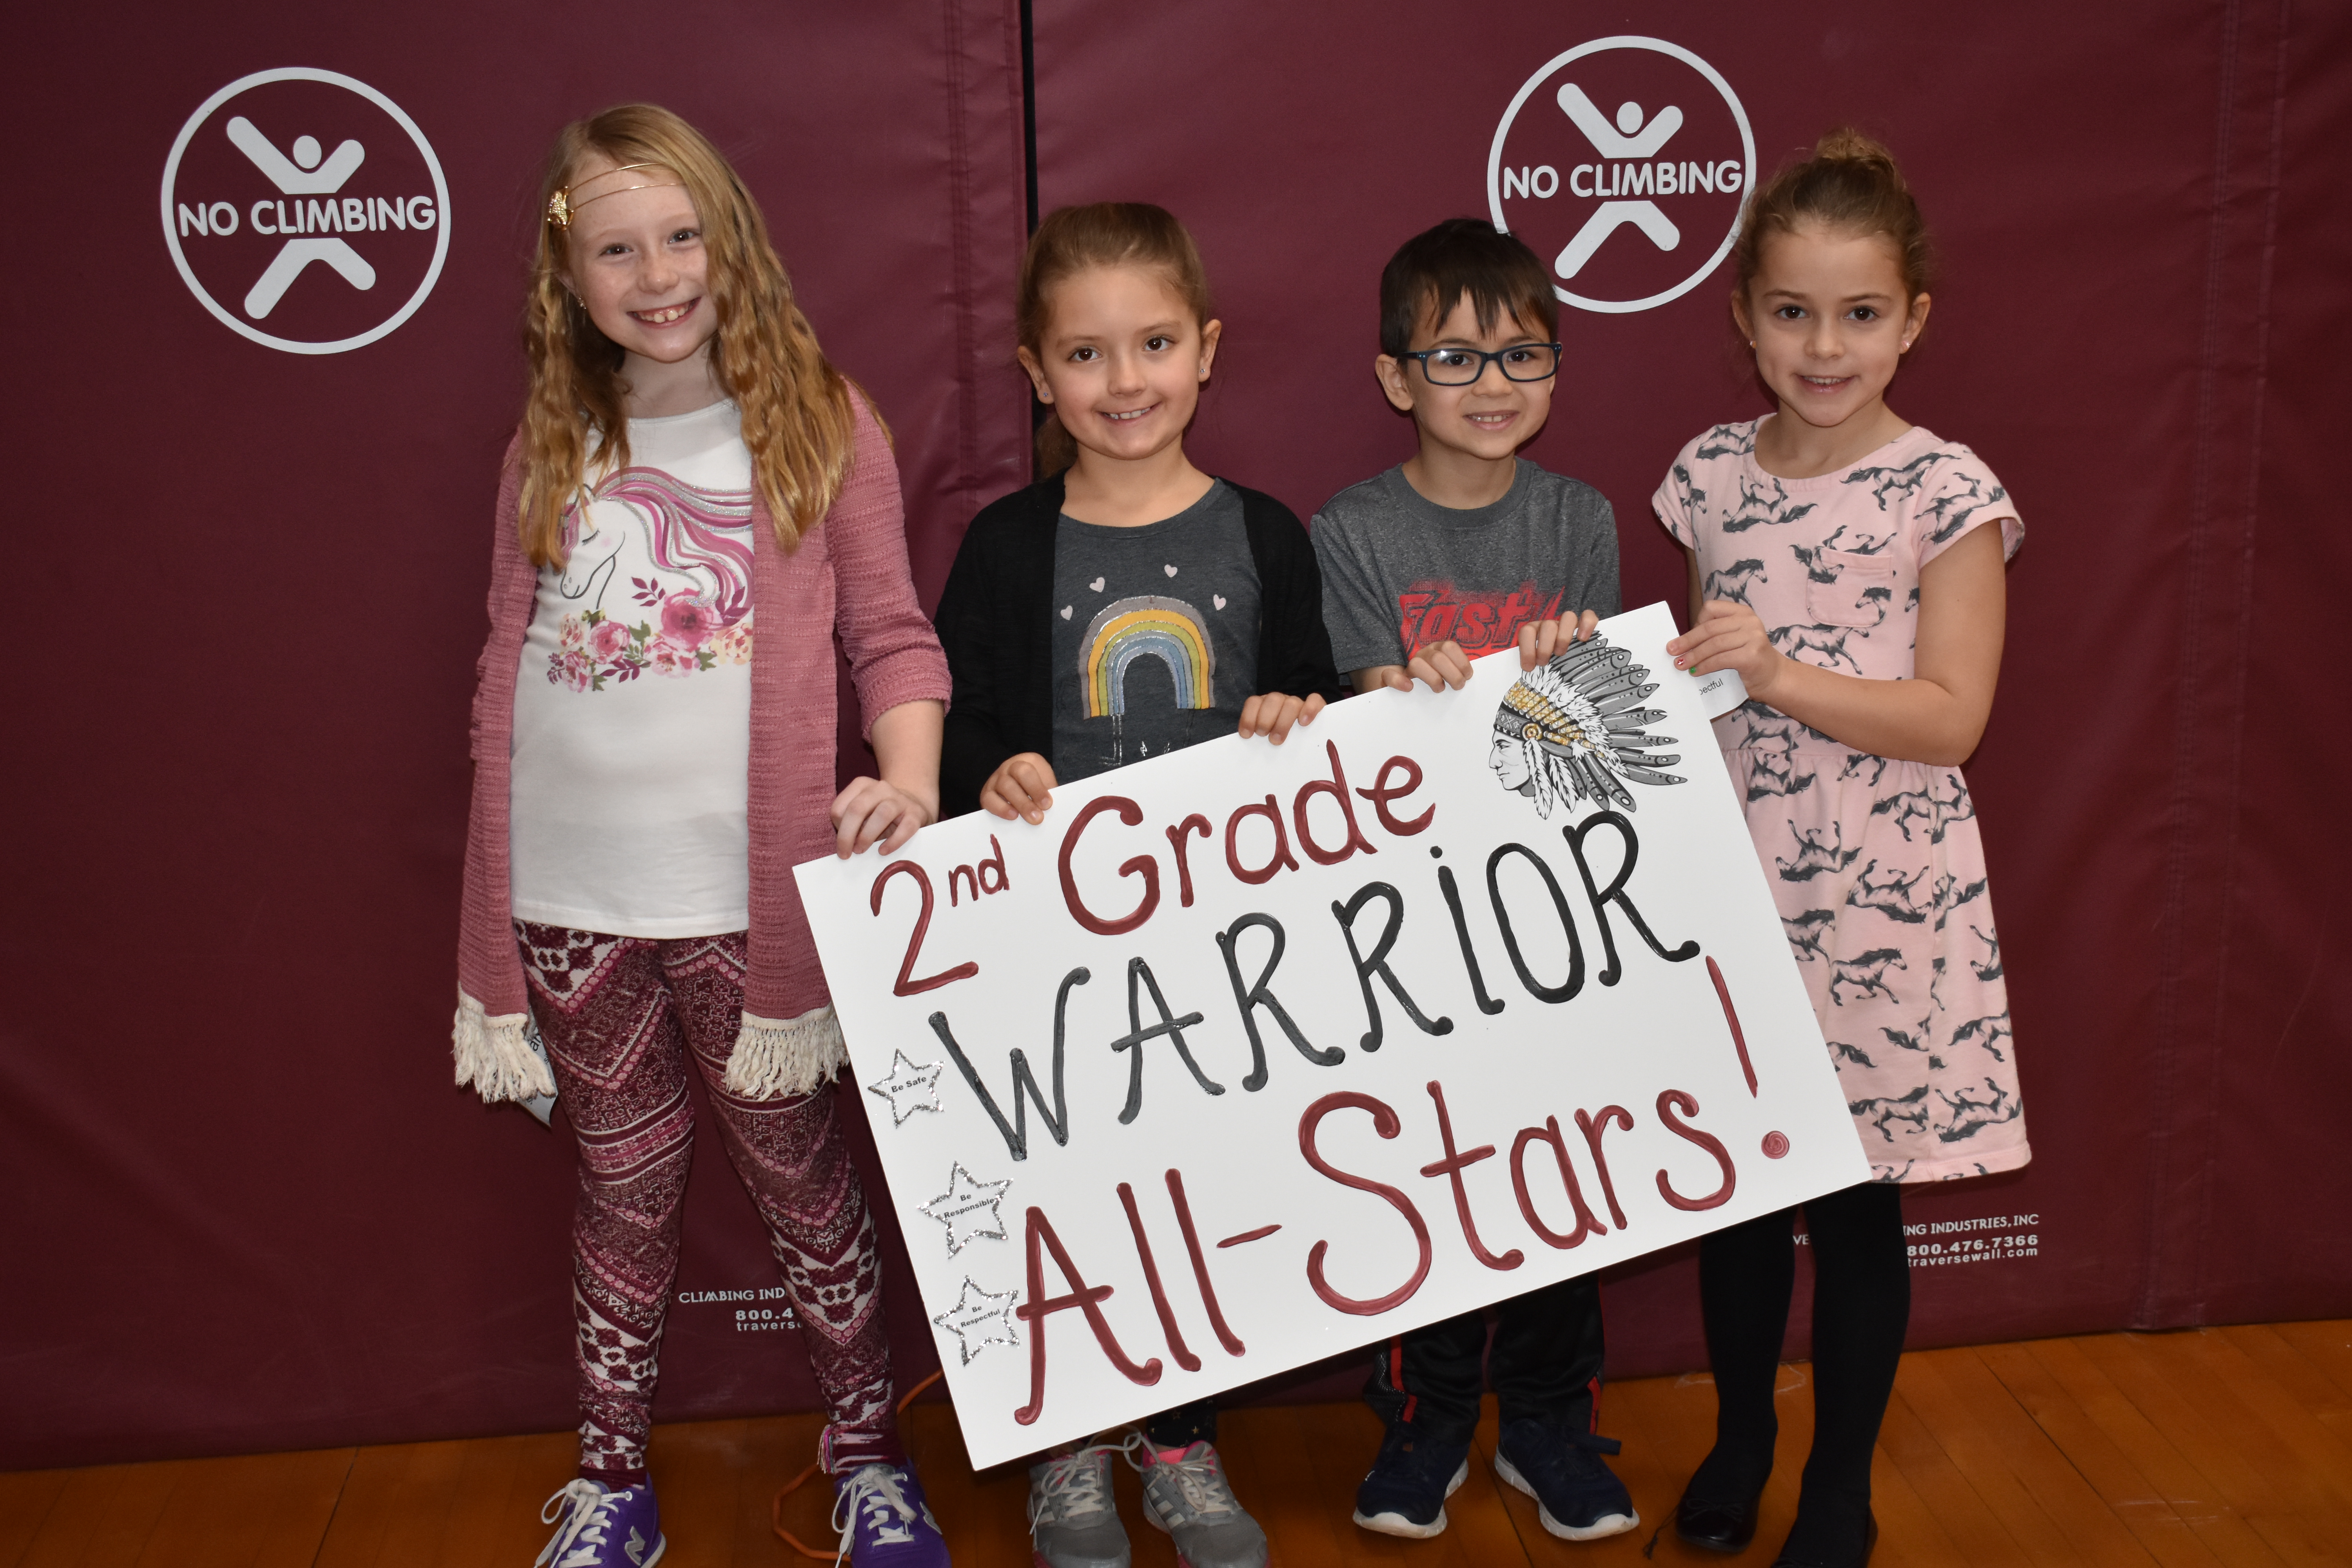 Students grouped together with a sign showing their grade level.